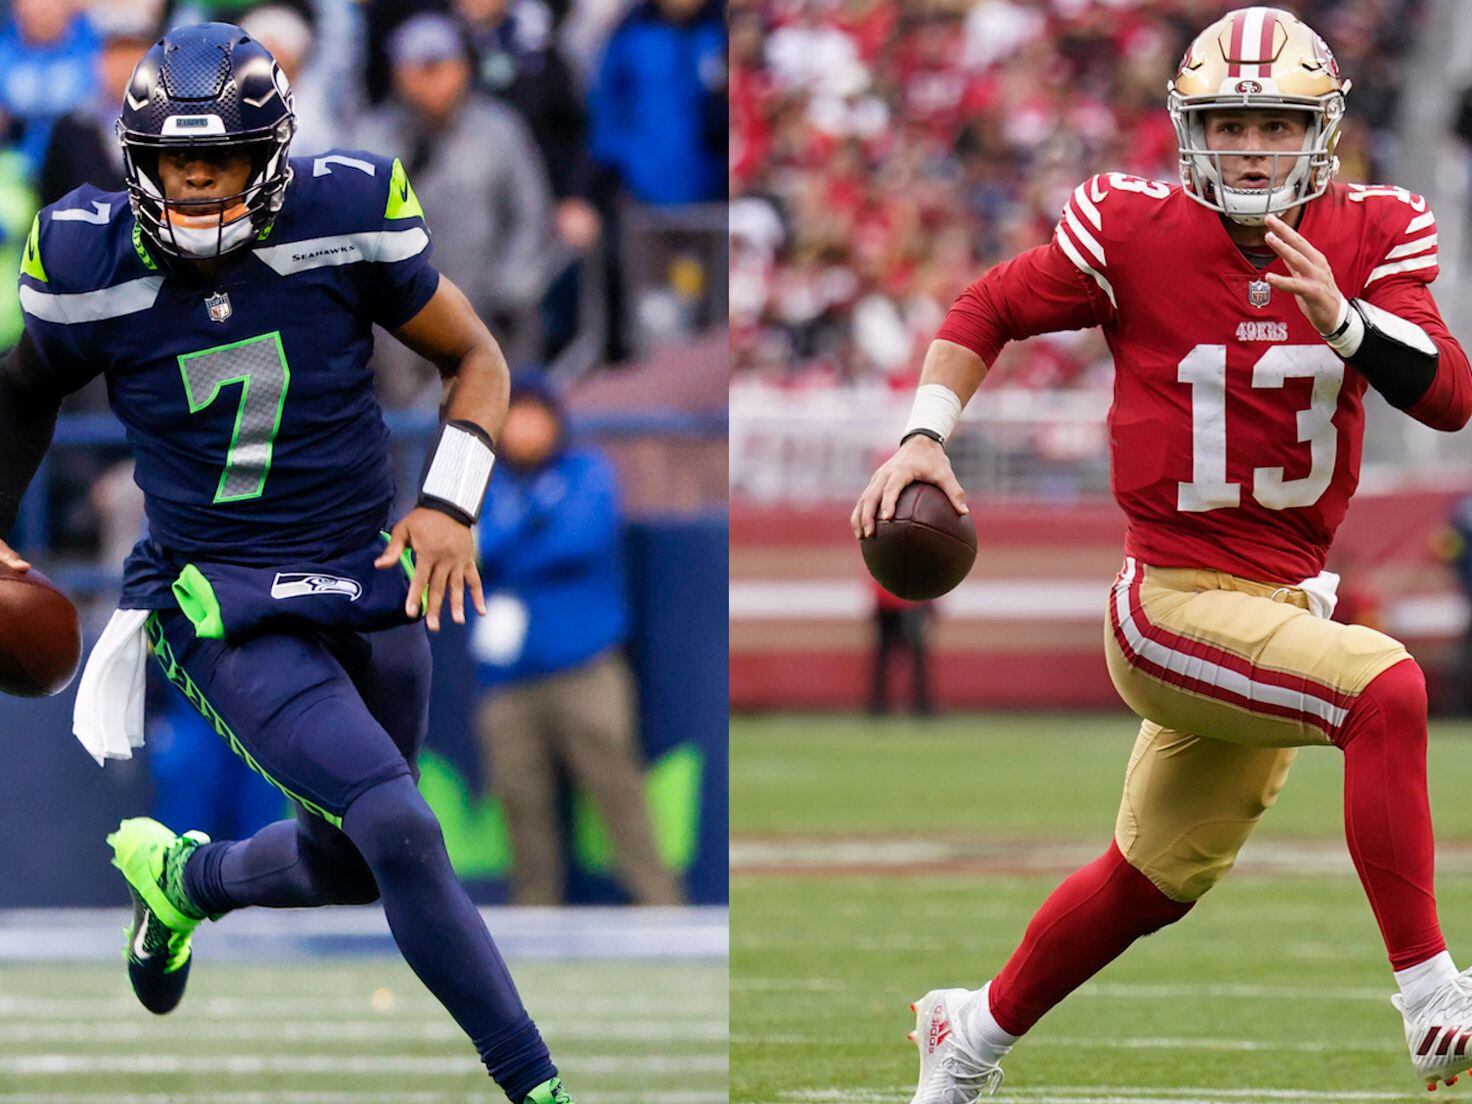 What channel is Seahawks vs. 49ers on today? Time, TV schedule for NFL  wild-card playoff game